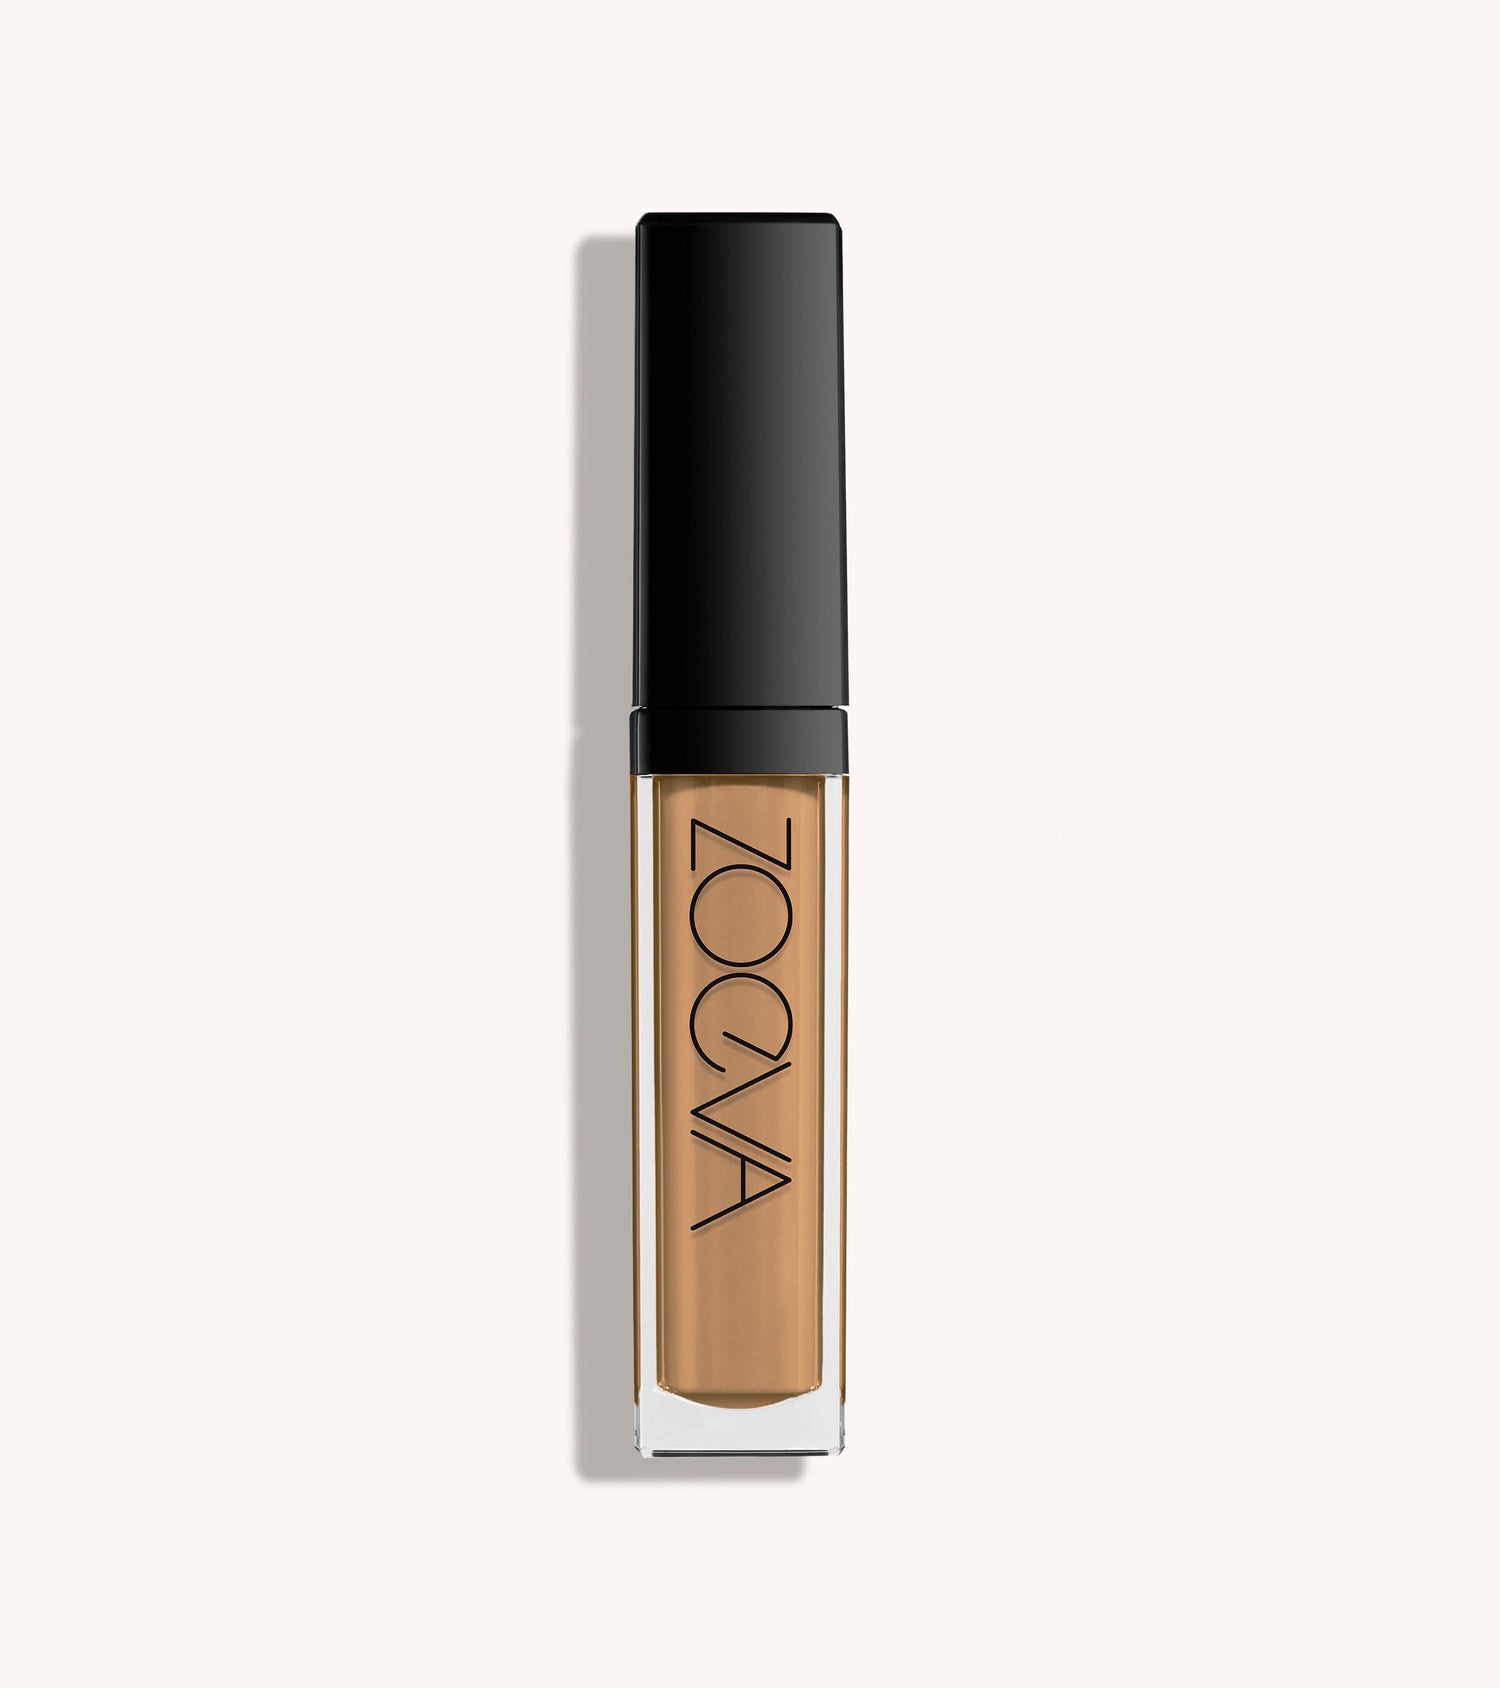 Authentik Skin Perfector Concealer (170 Live) Main Image featured